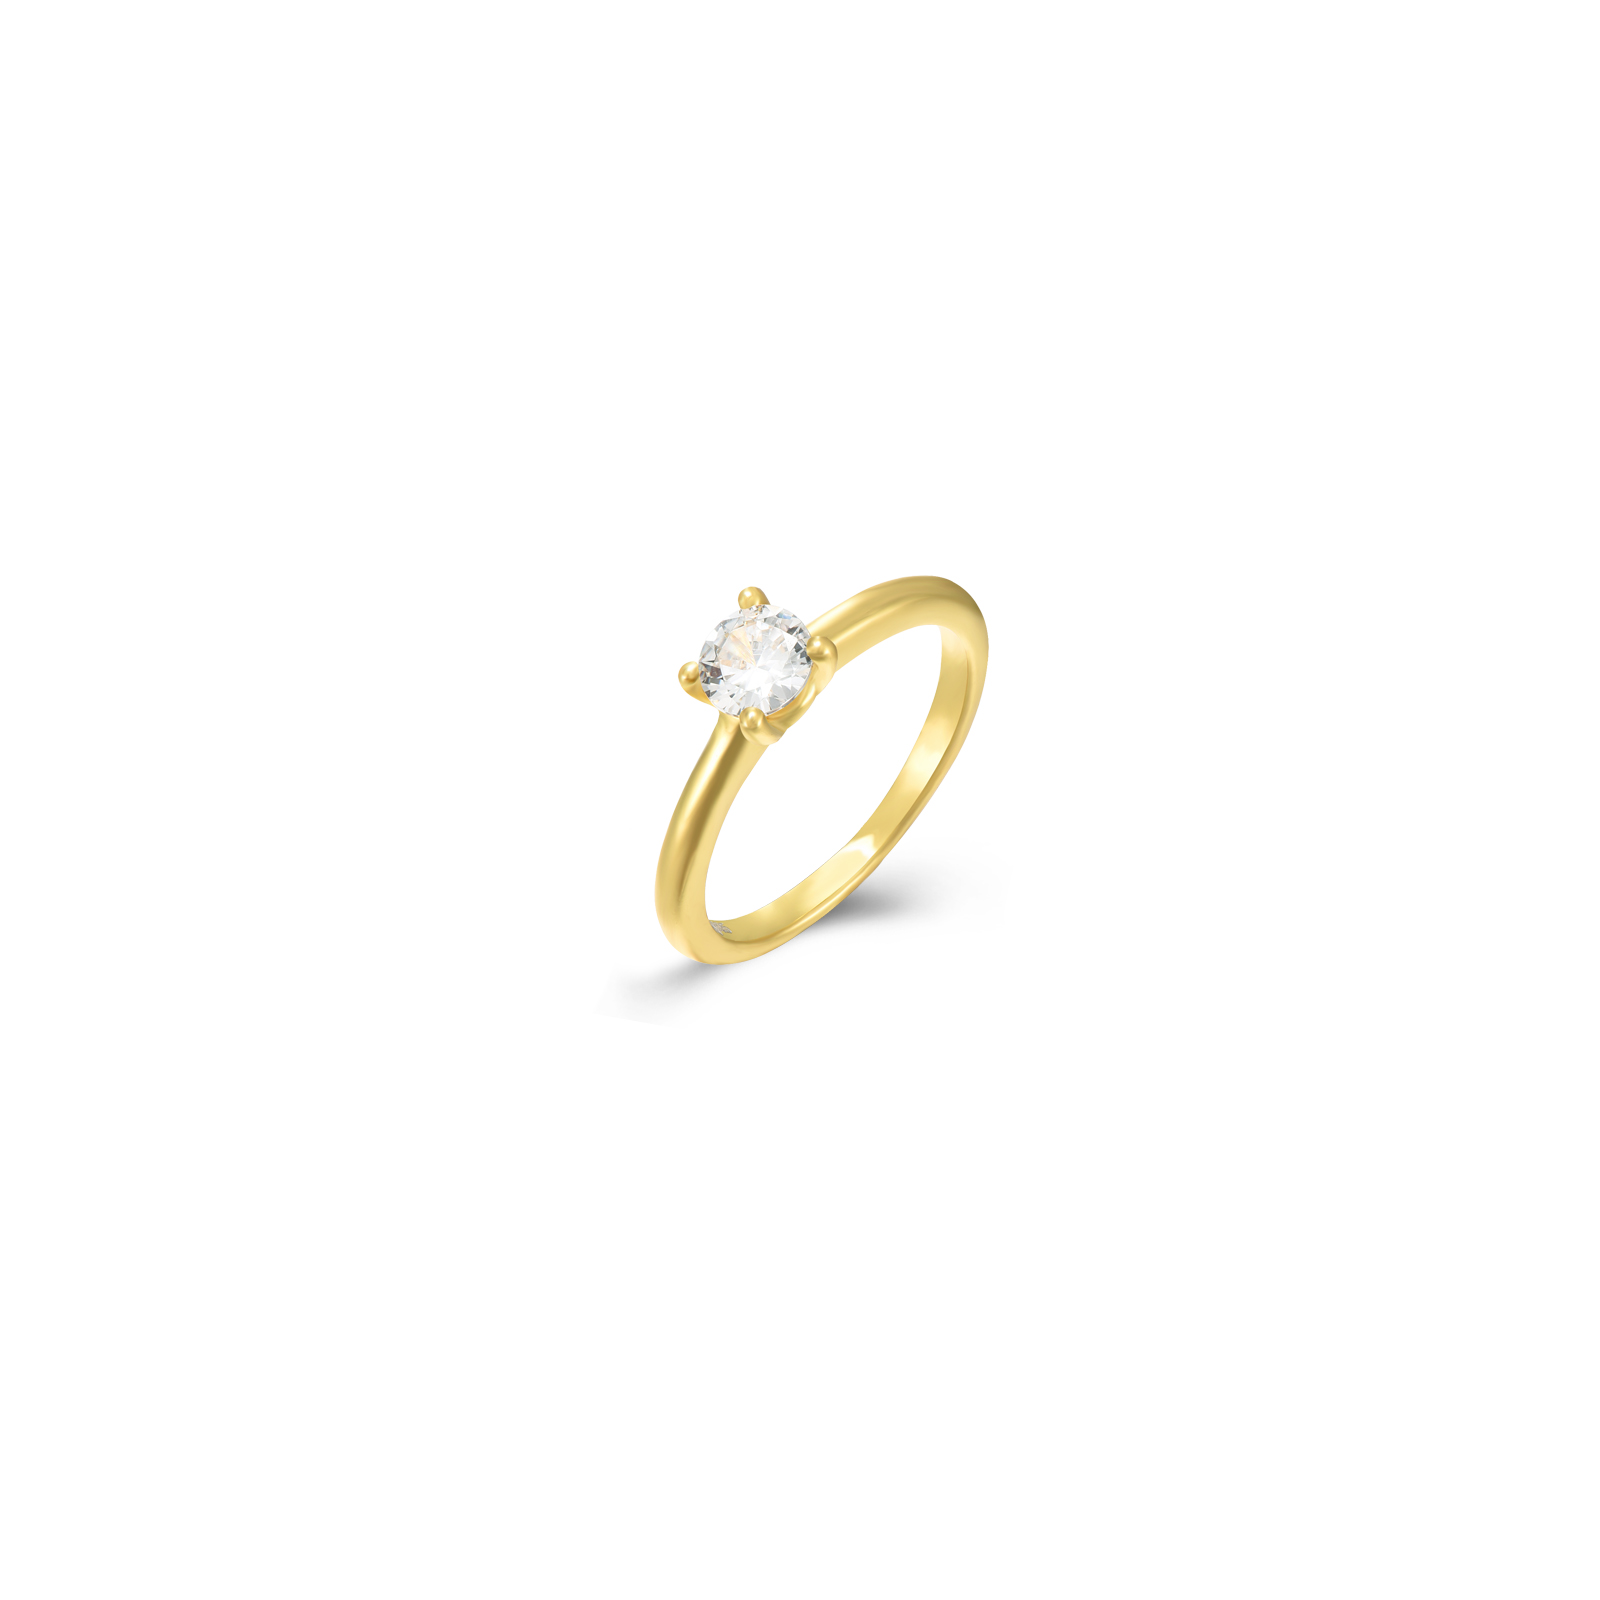 Silver Zircon Rings Solitaire Ring - Zirconia 5mm - Gold Plated